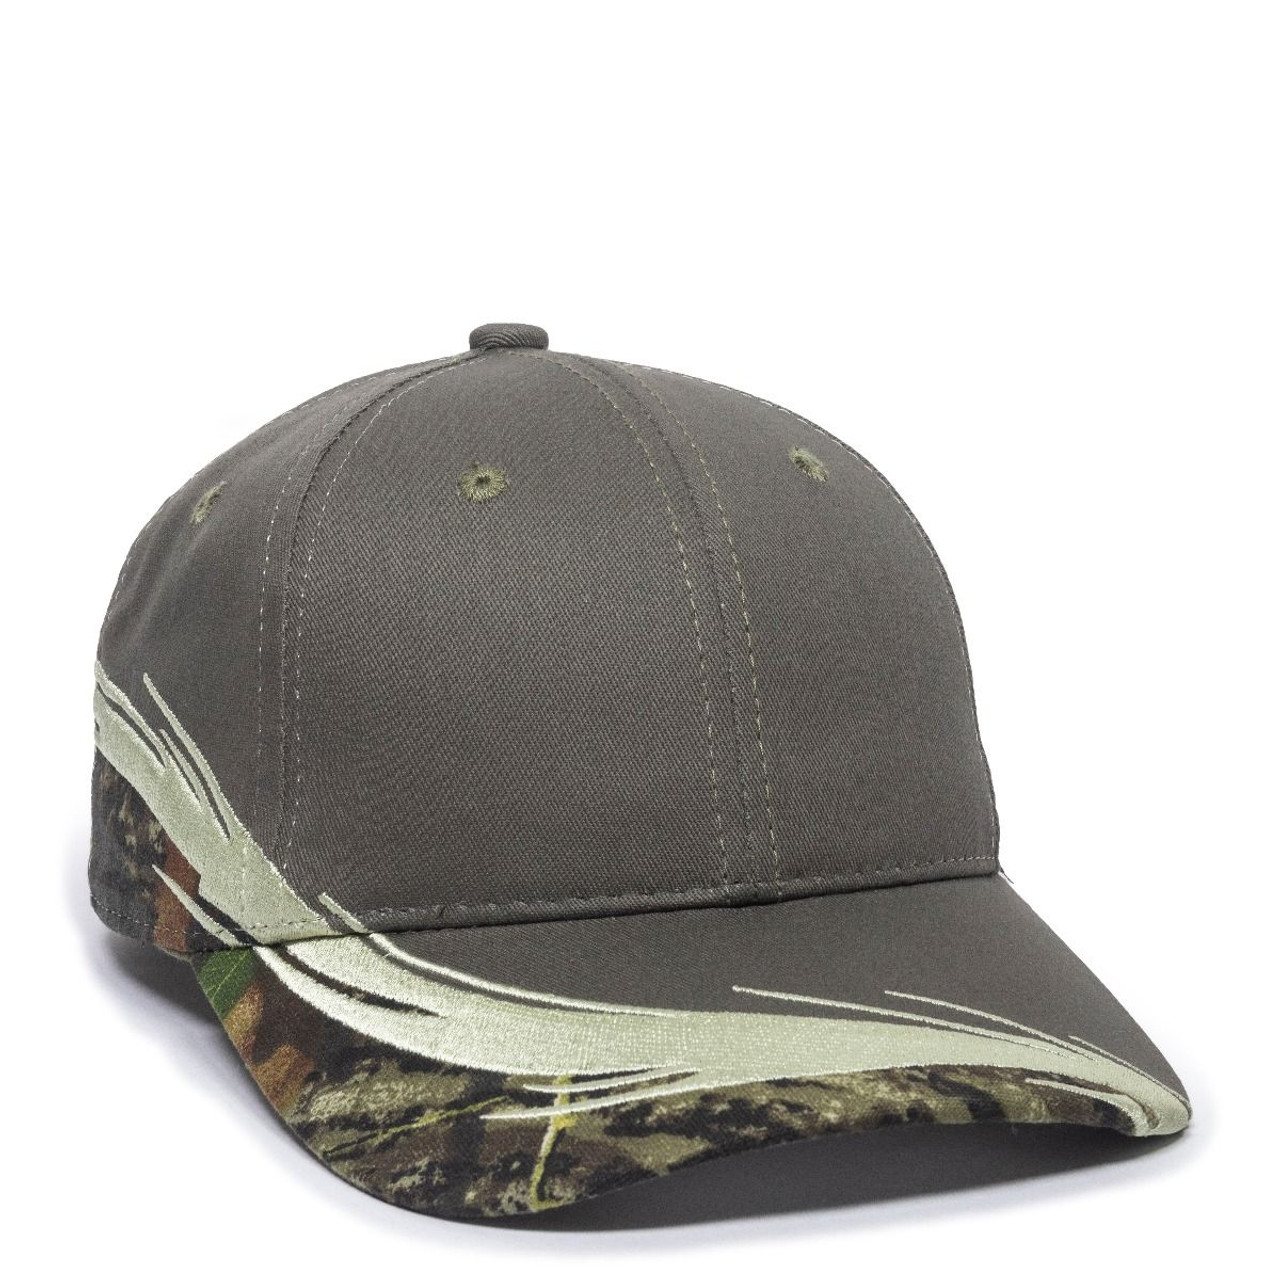 Promotional Licensed Camo with Flare Visor Embroidery Hat